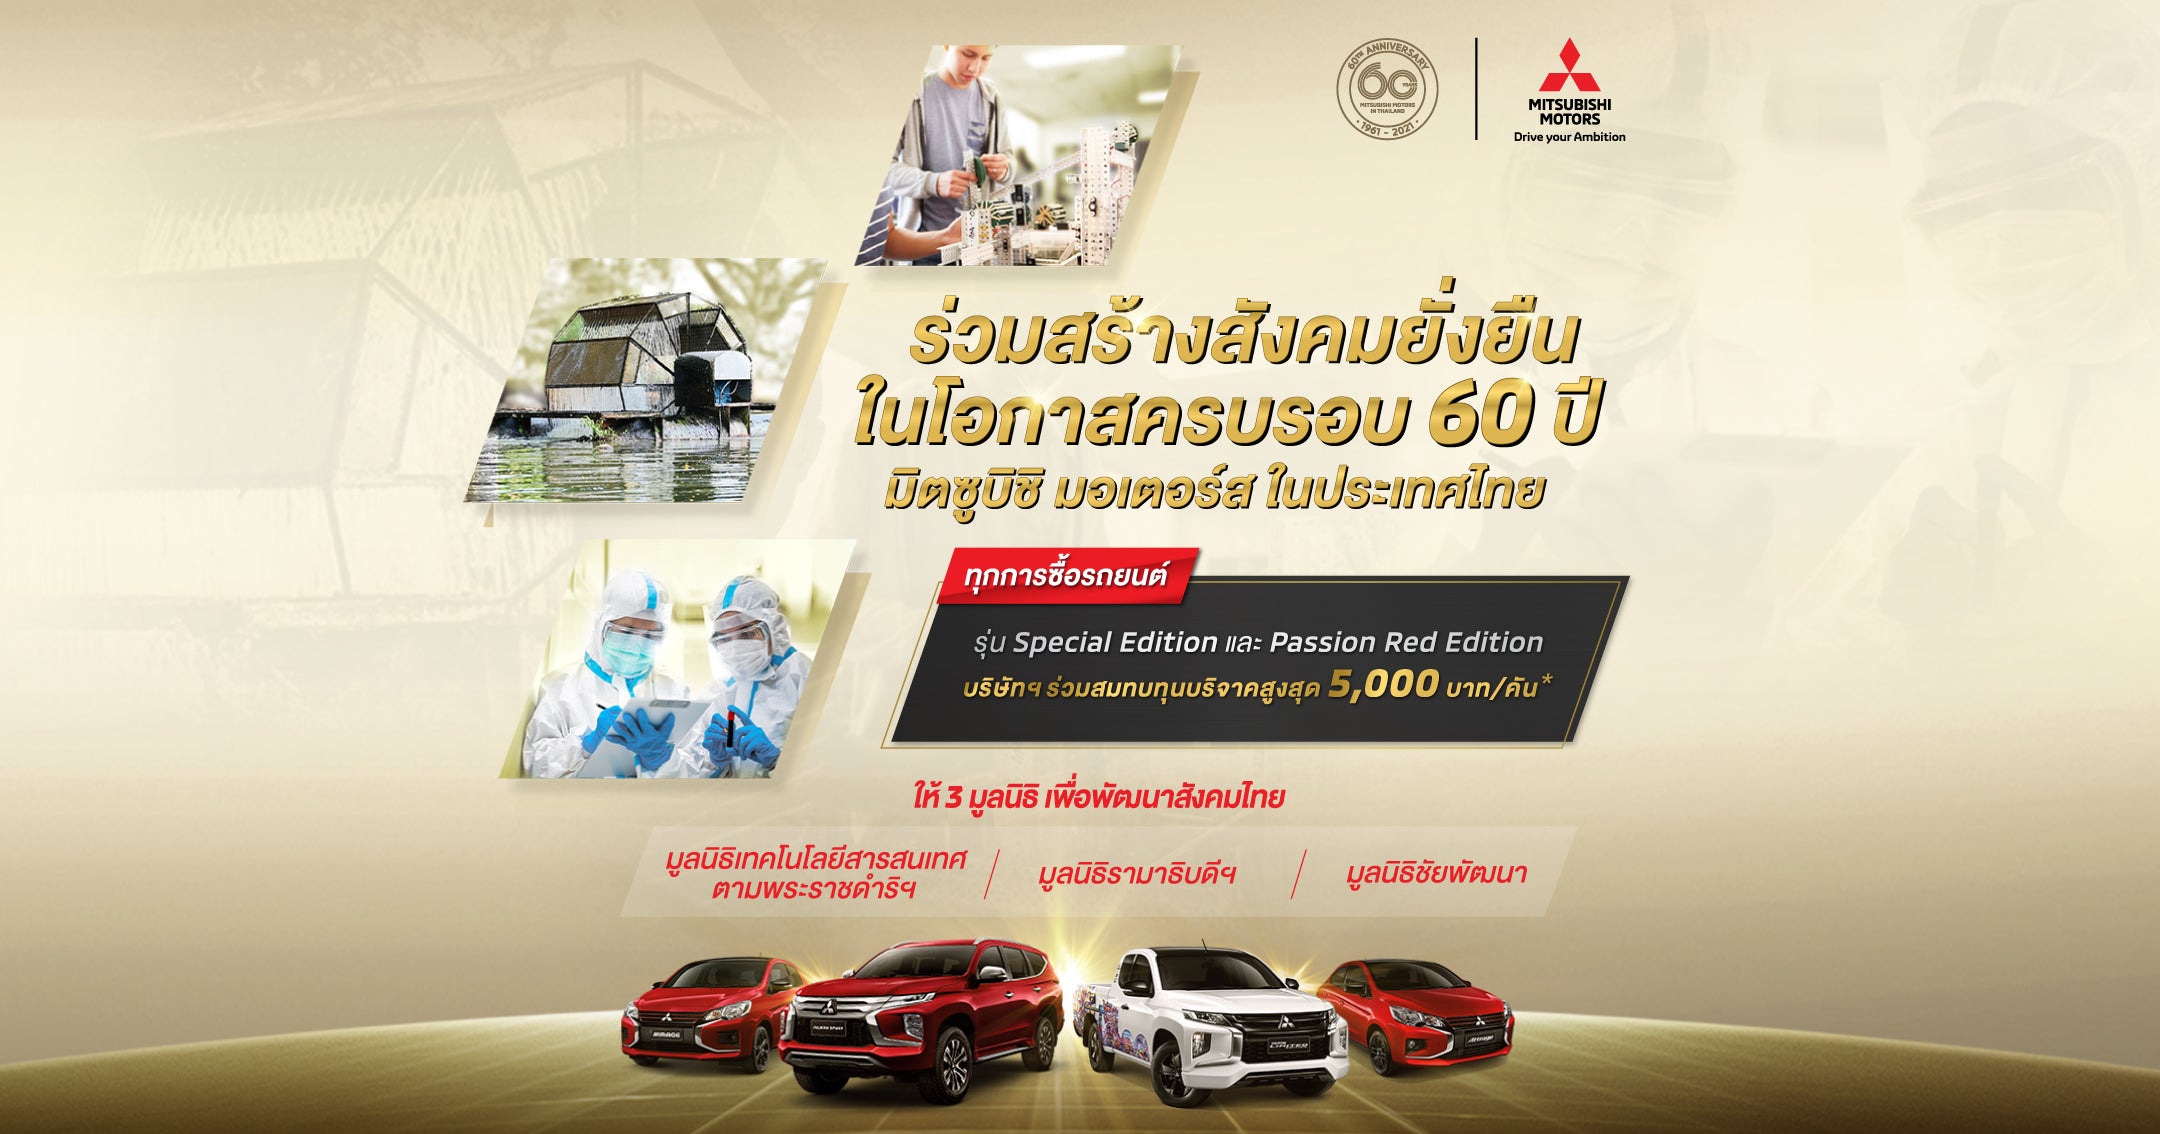 mitsubishi-special-edition-and-passion-red-edition-up-to-five-thousand-baht-update